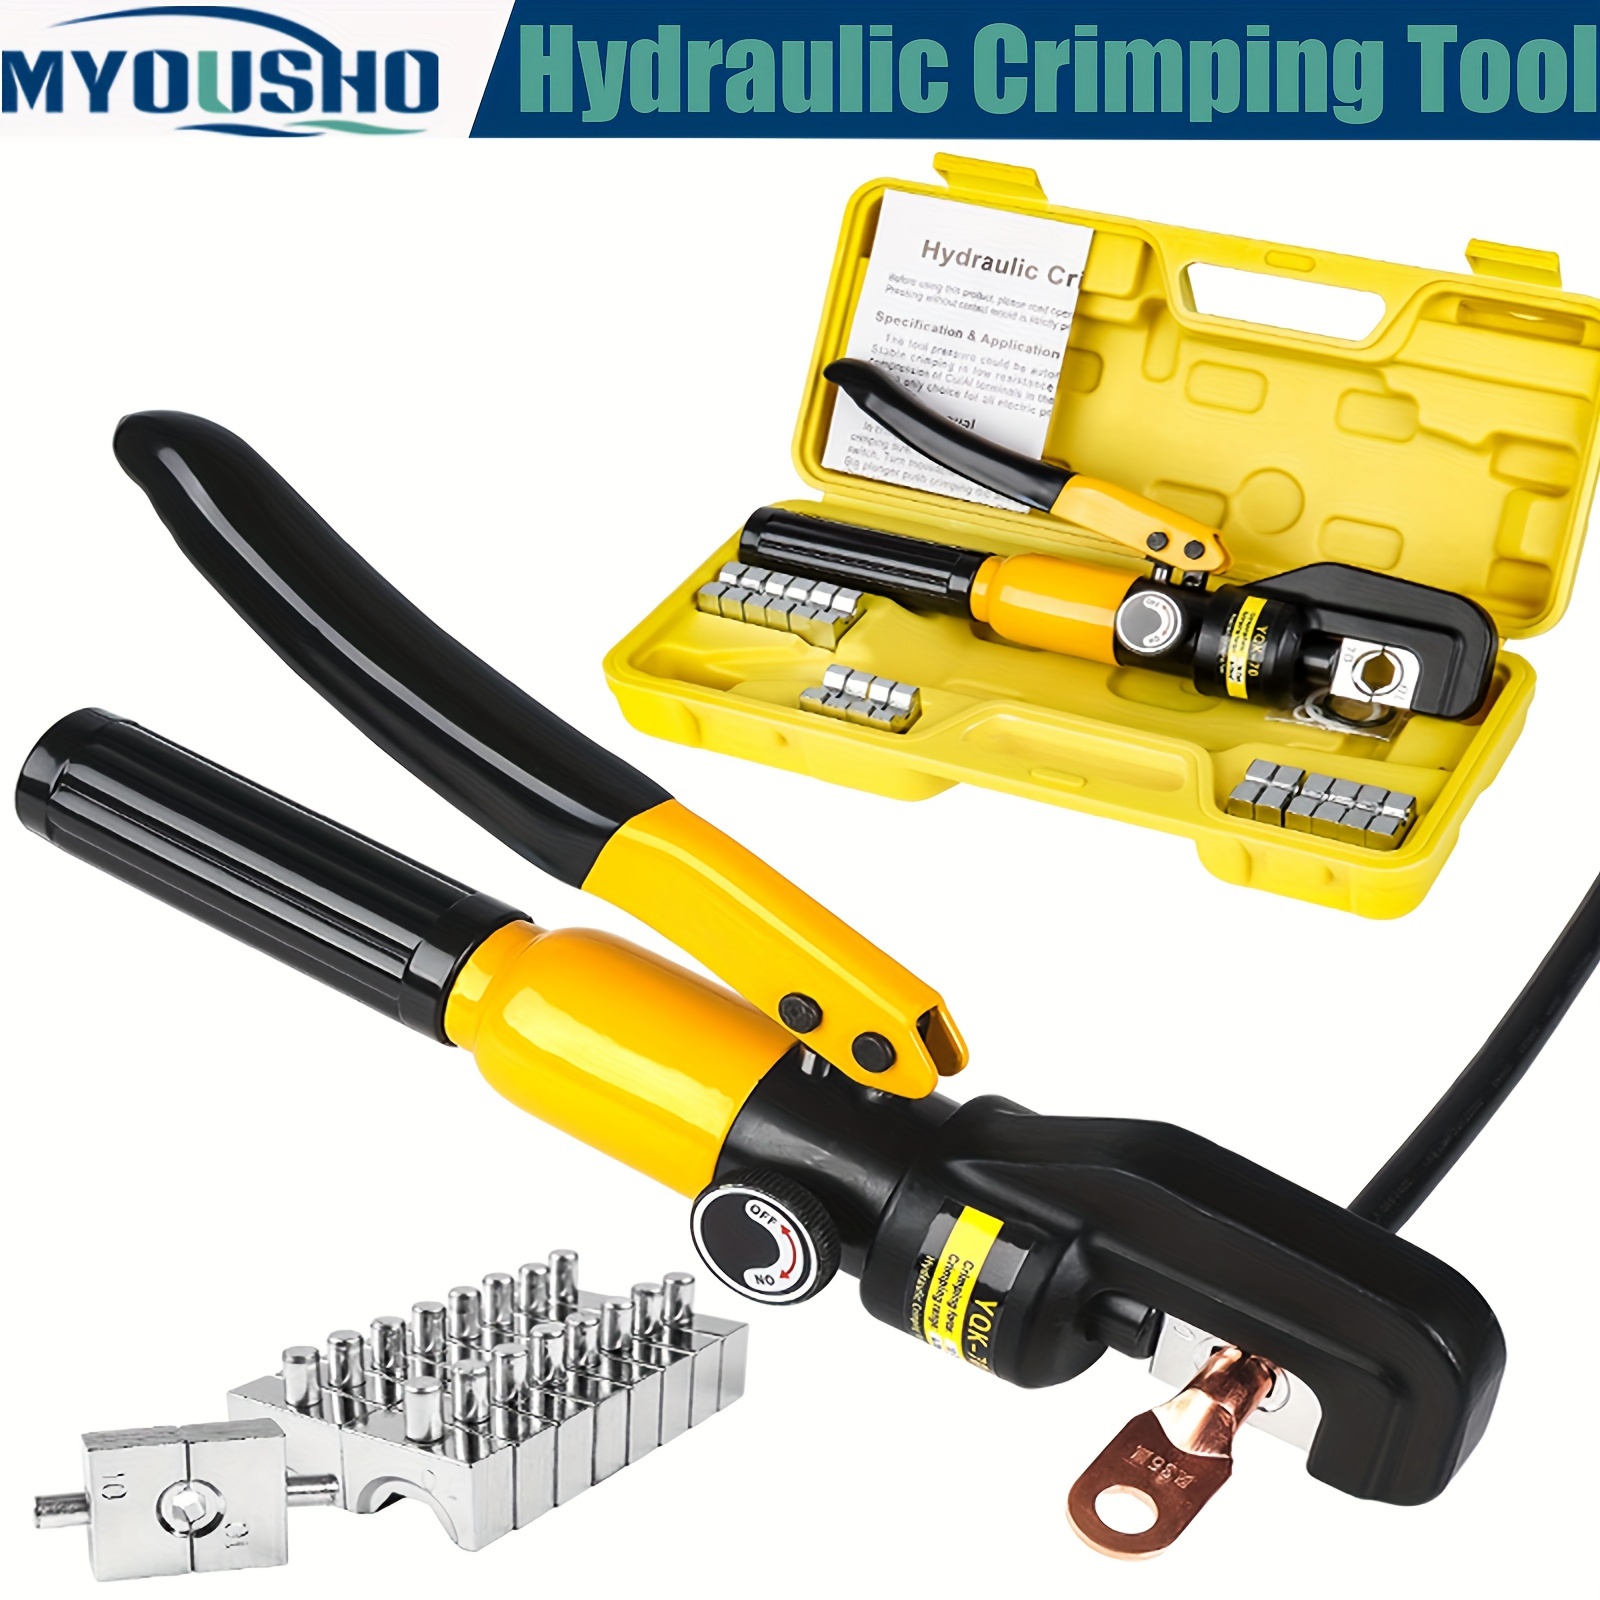 

Myousho Yqk-70 Hydraulic Cable Lug Crimper - Durable Metal Construction, No Power Needed